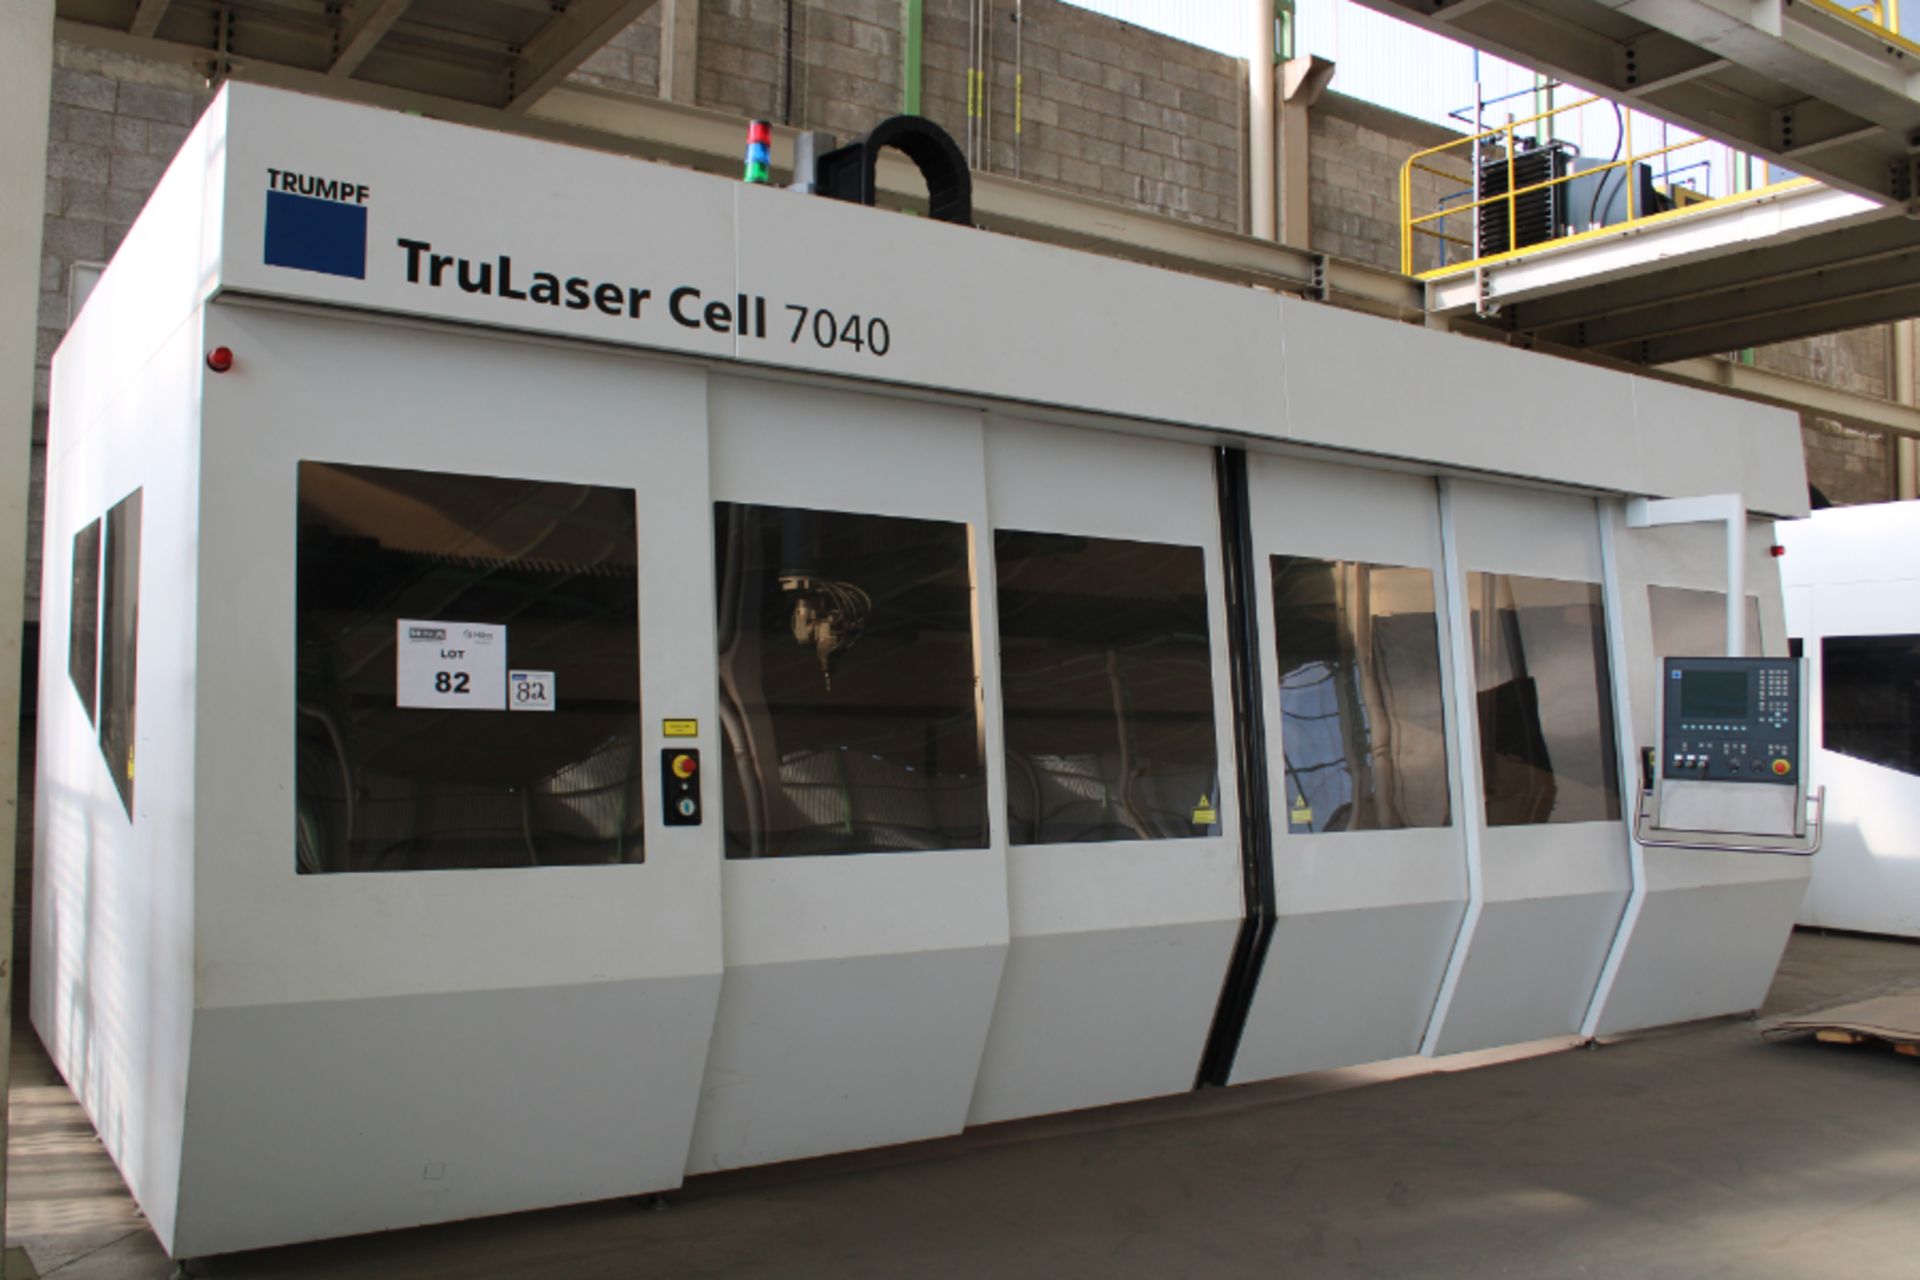 Trumpf Trulaser Cell 7040 3D Laser Cutter, 4000 W, 85 KVA, New 2017 - Image 2 of 15